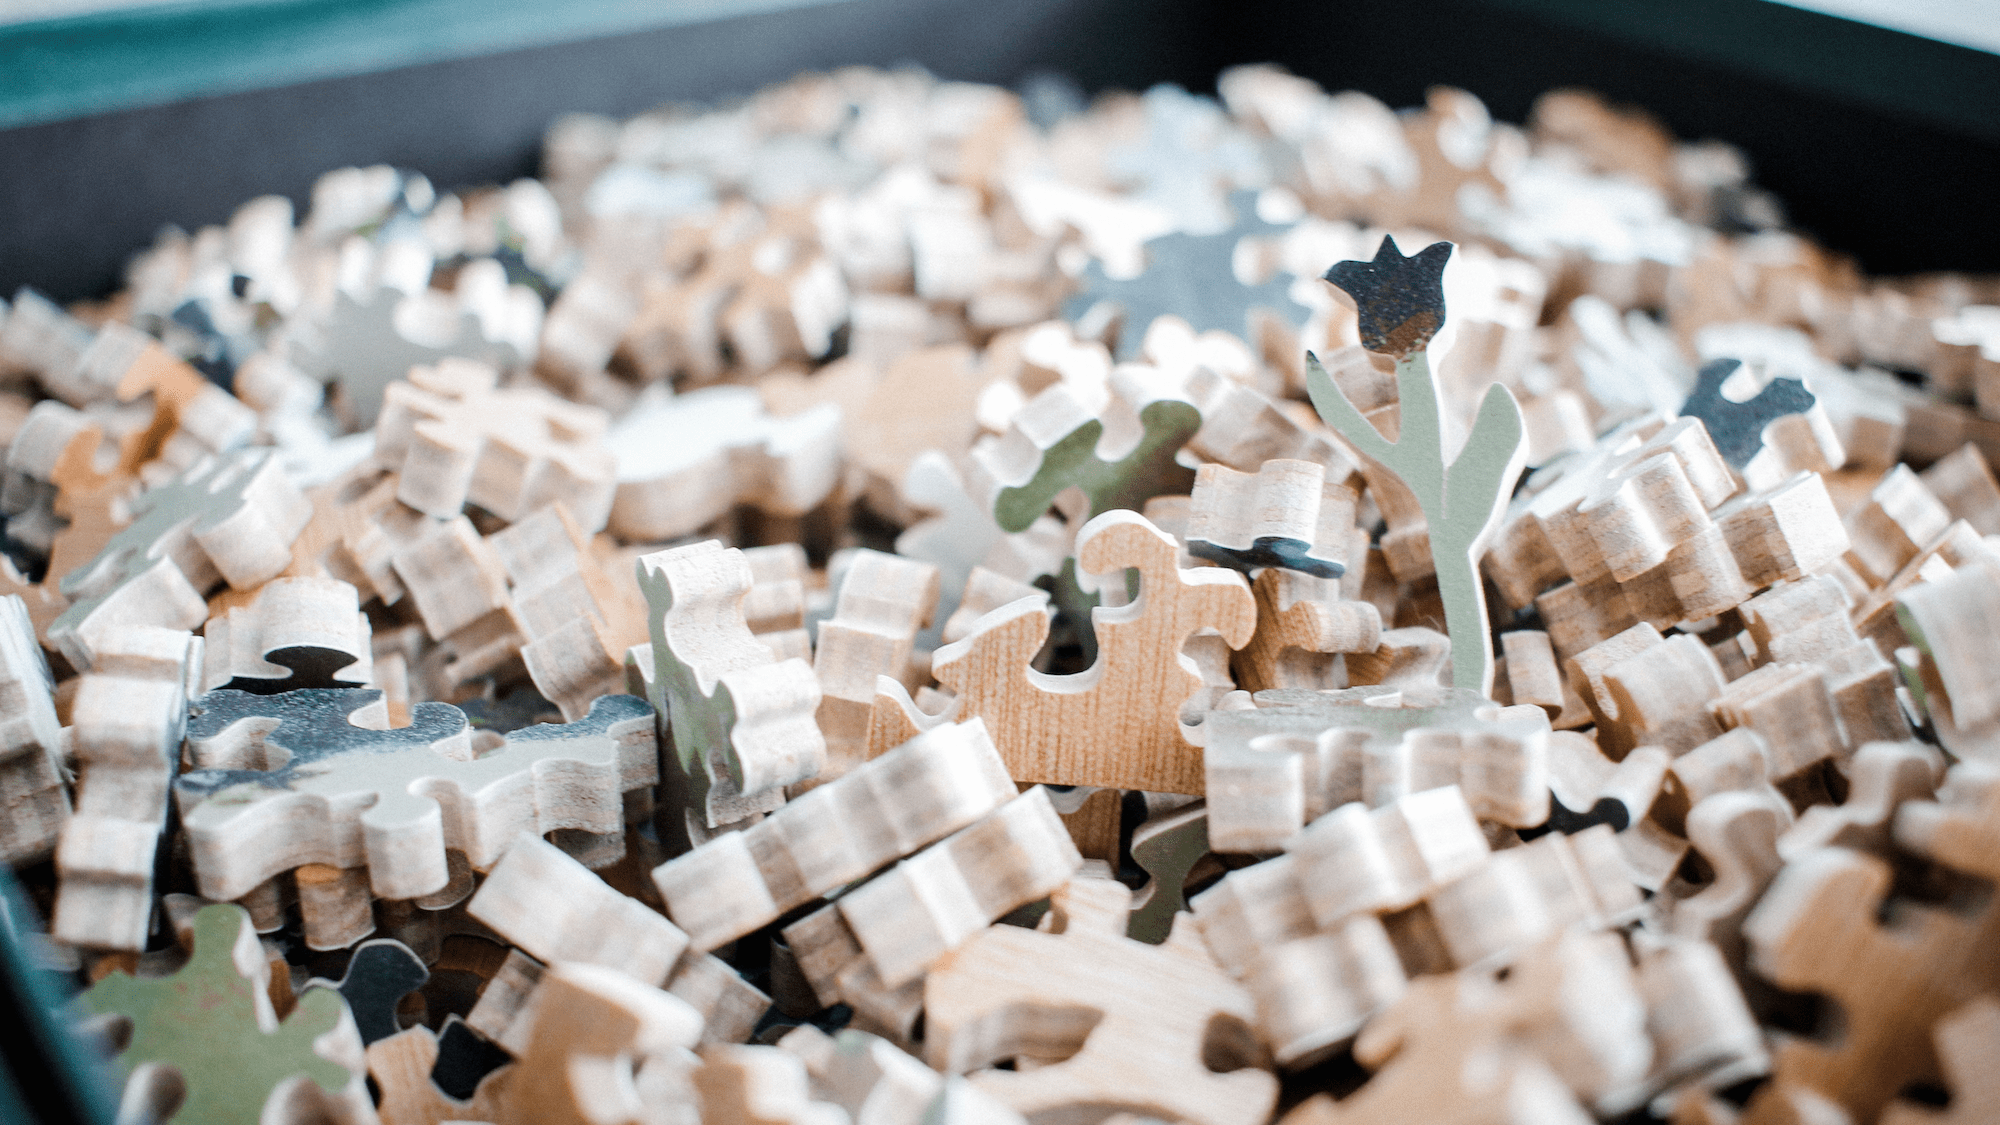 Handcrafted wooden jigsaw puzzle pieces